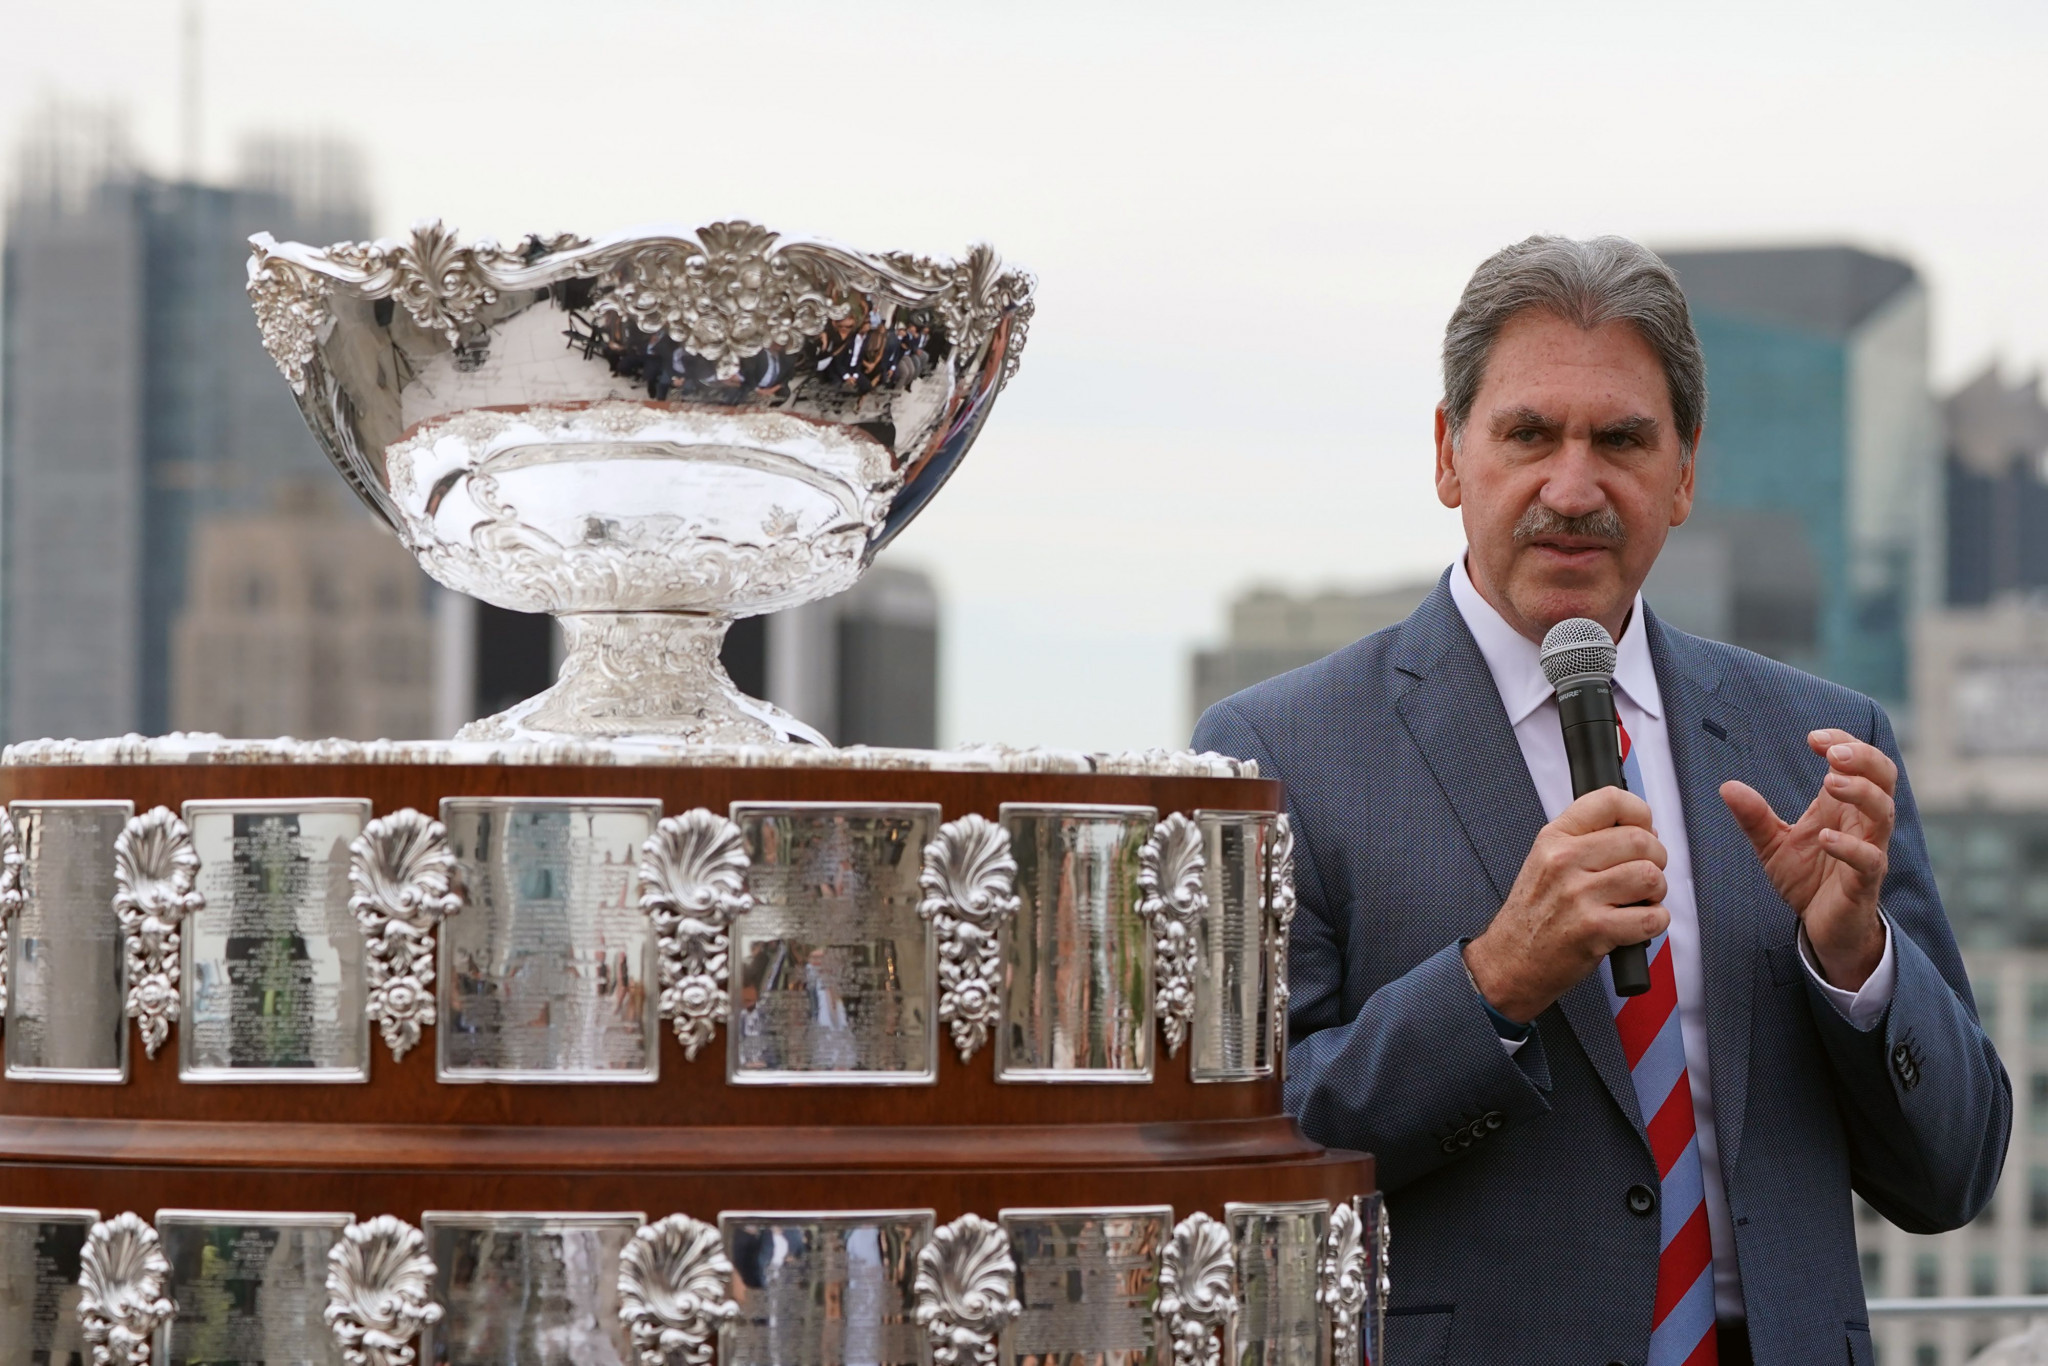 David Haggerty is seeking a second term as ITF President ©Getty Images